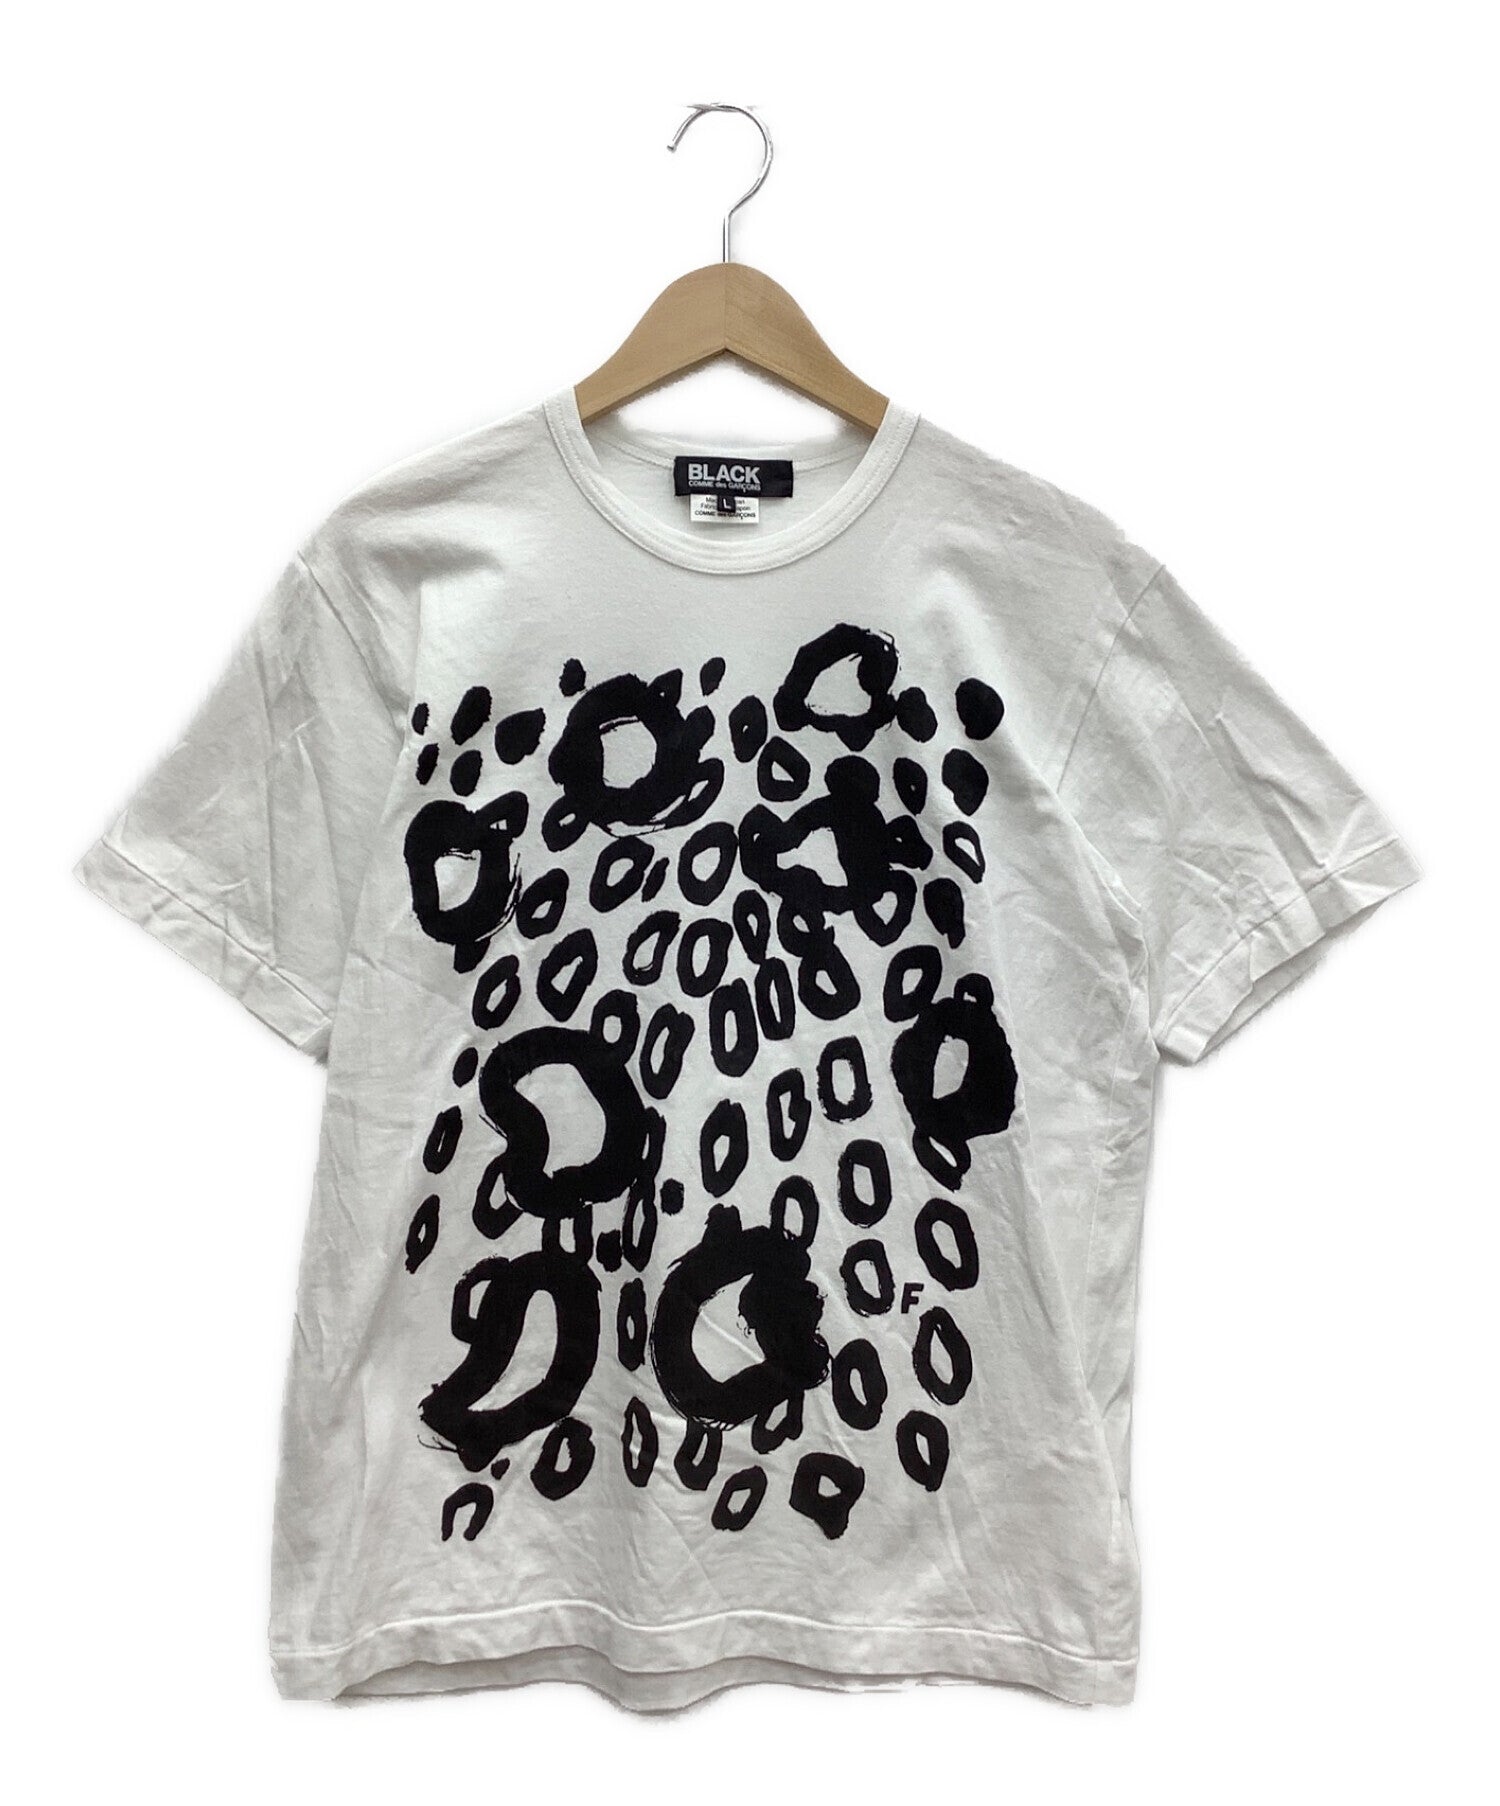 BLACK COMME des GARCONS printed cut-and-sew 1G-T003